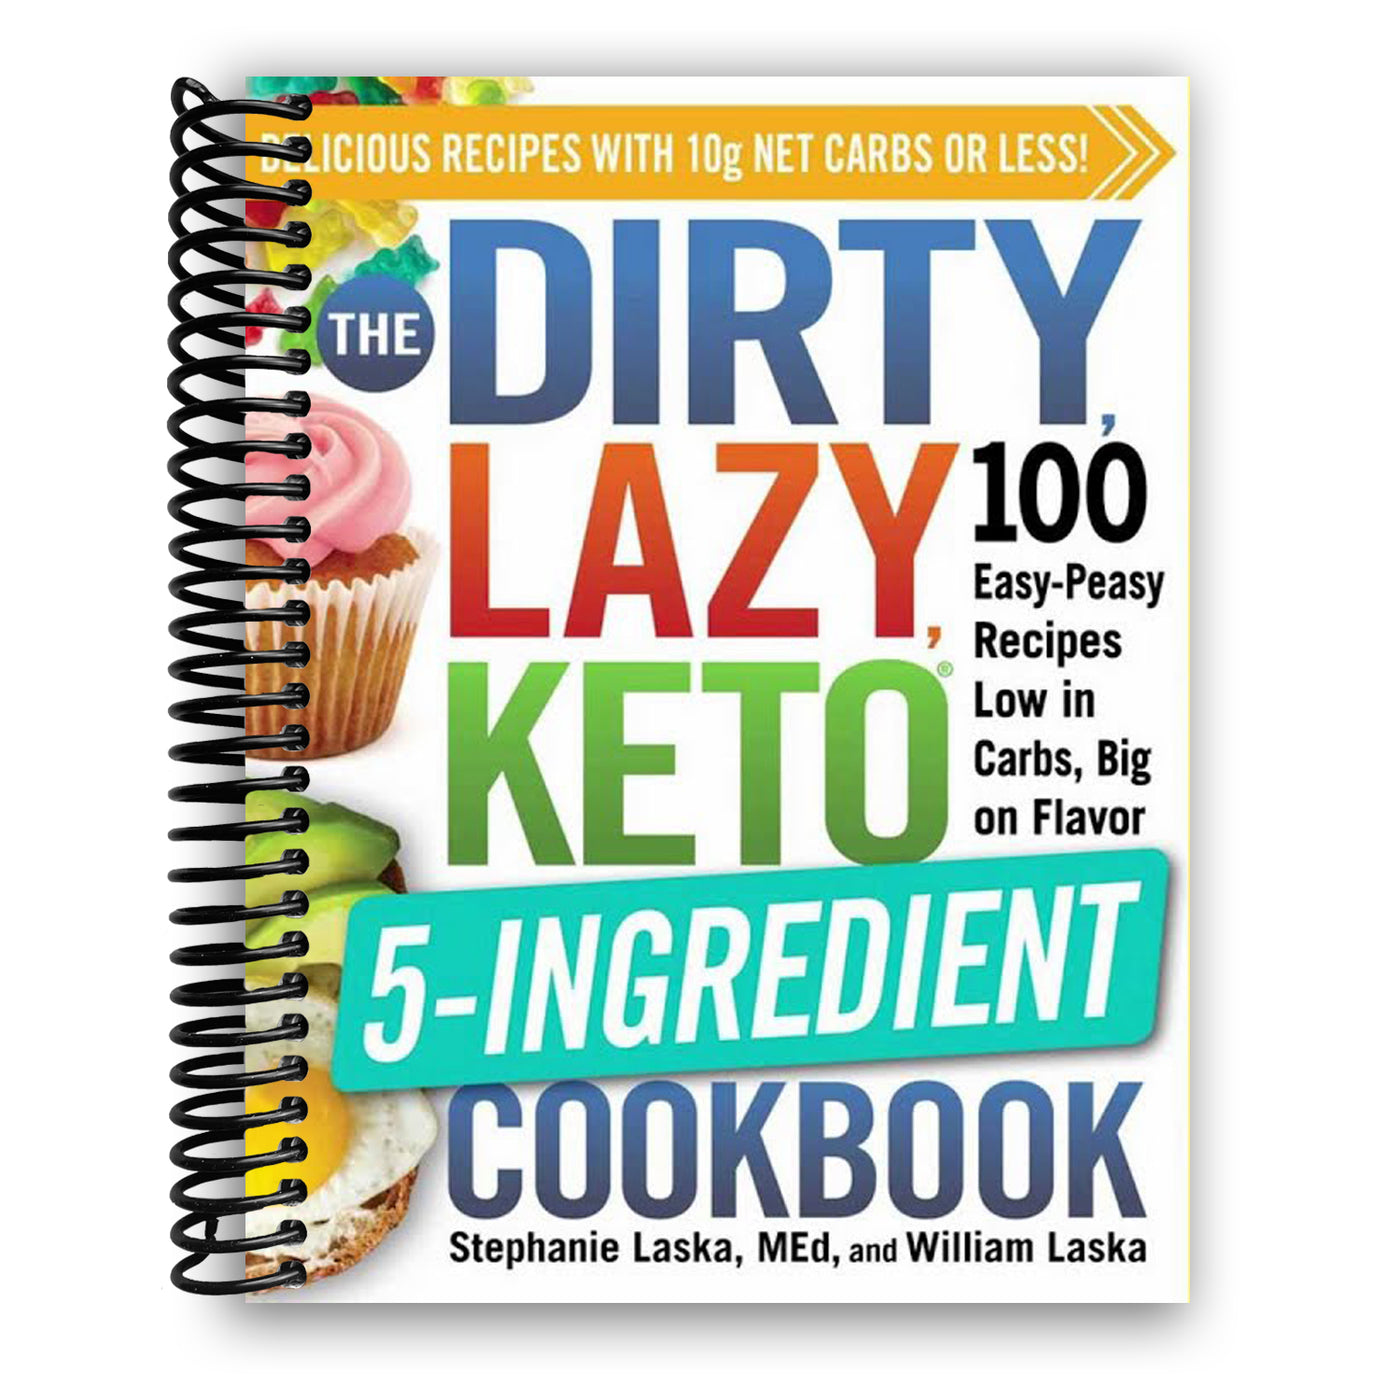 The DIRTY, LAZY, KETO 5-Ingredient Cookbook: 100 Easy-Peasy Recipes Low in Carbs, Big on Flavor (Spiral Bound)